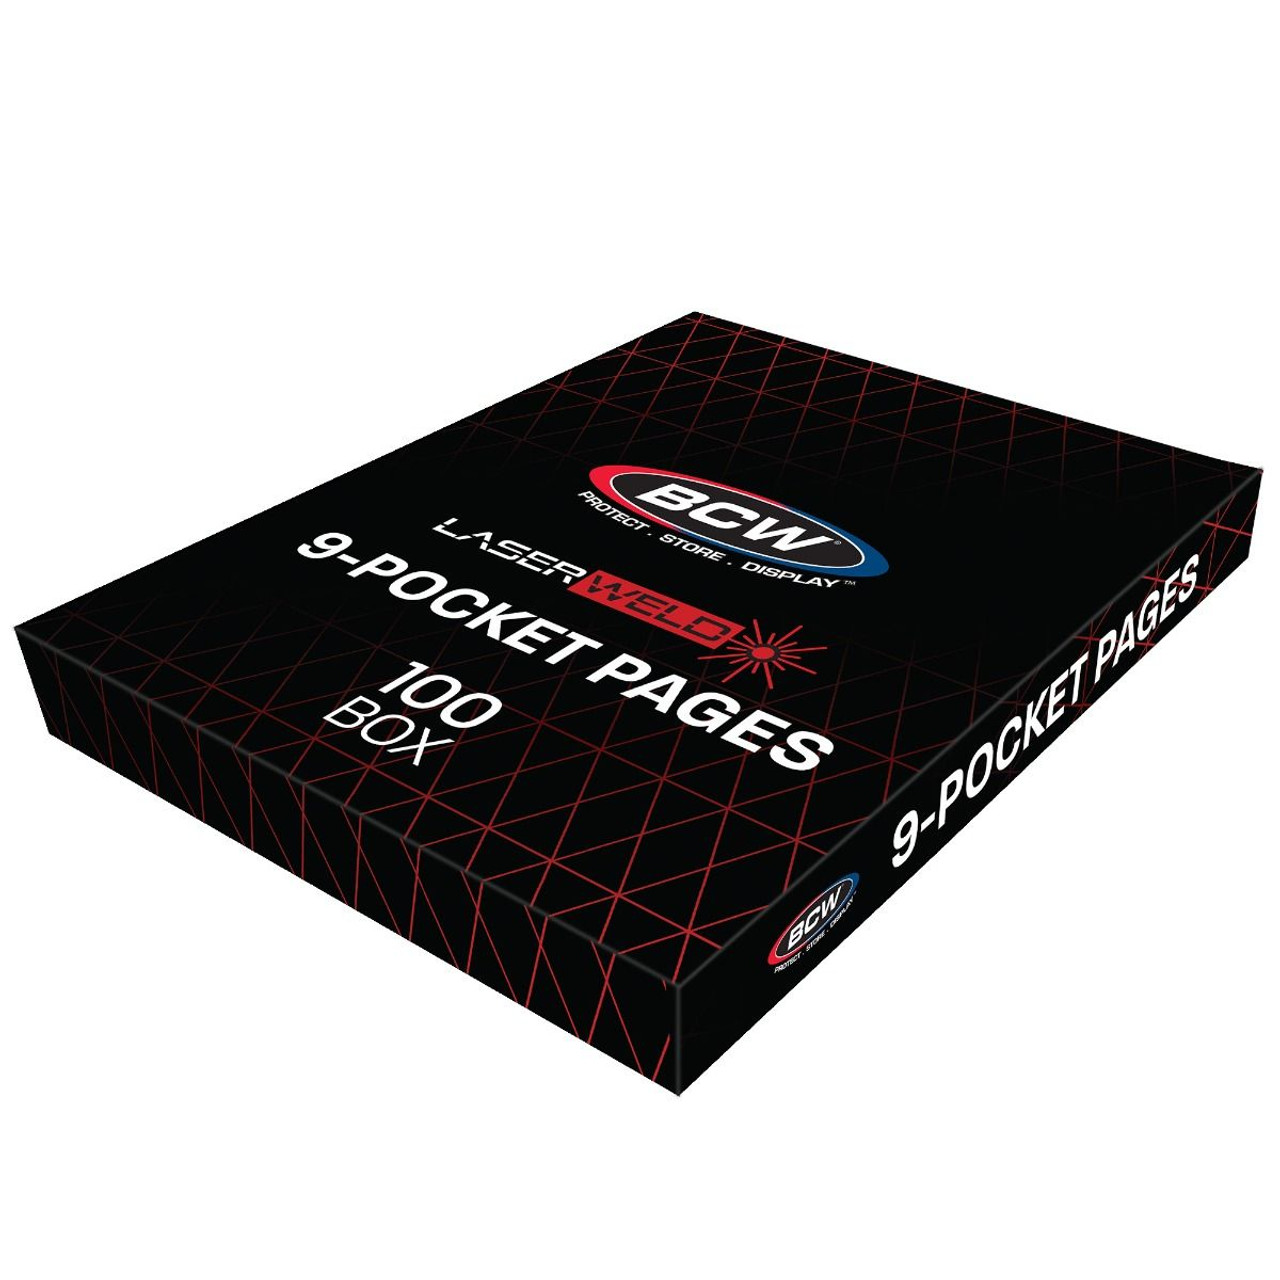 BCW LaserWeld 9-Pocket Pages 100ct Box / Case of 10